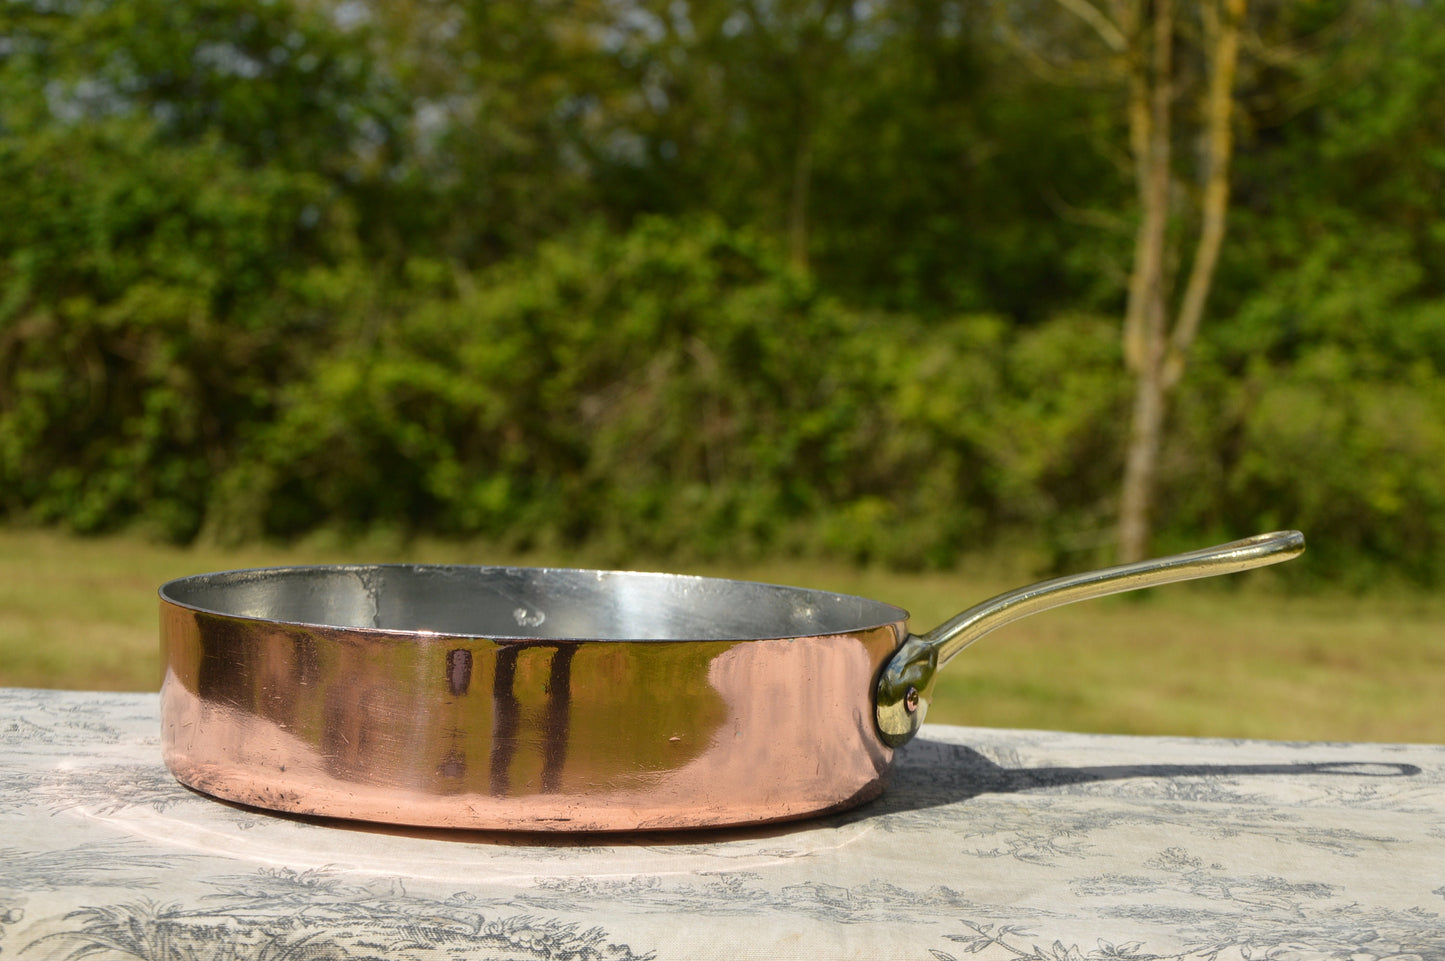 Gaillard of Paris Copper Pan New Artisan Tin 24 cm 9 1/2" Vintage French Well Used Professional Saute Fry Pan 1.8mm Cast Bronze Handle